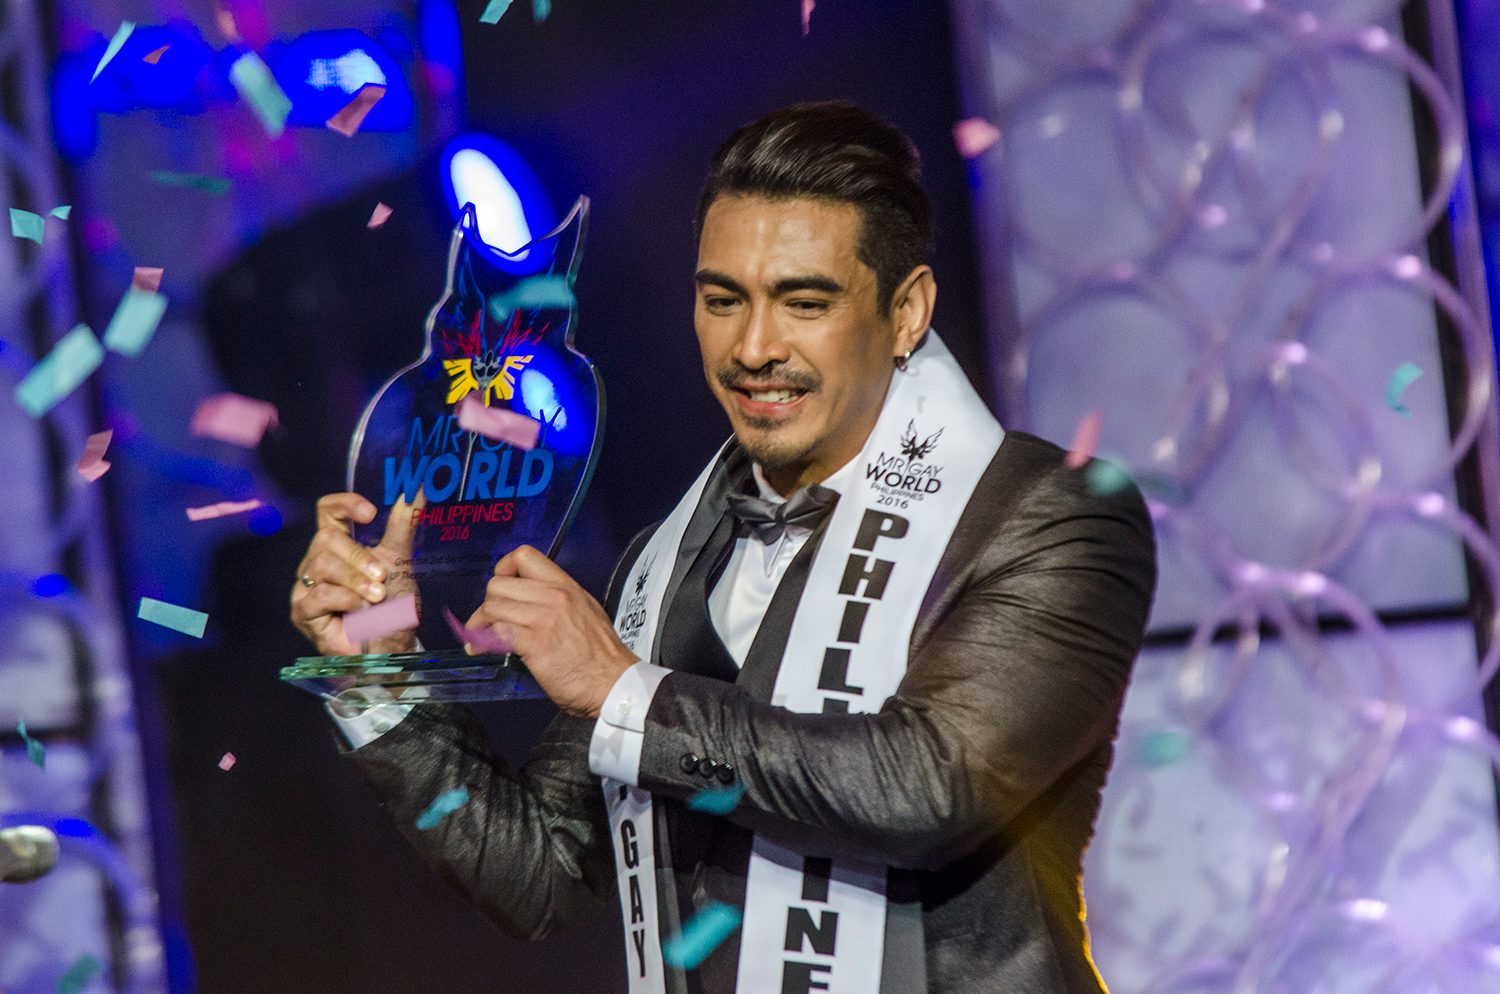 PHOTO RECAP: Mr Gay World Philippines 2016, a show to remember